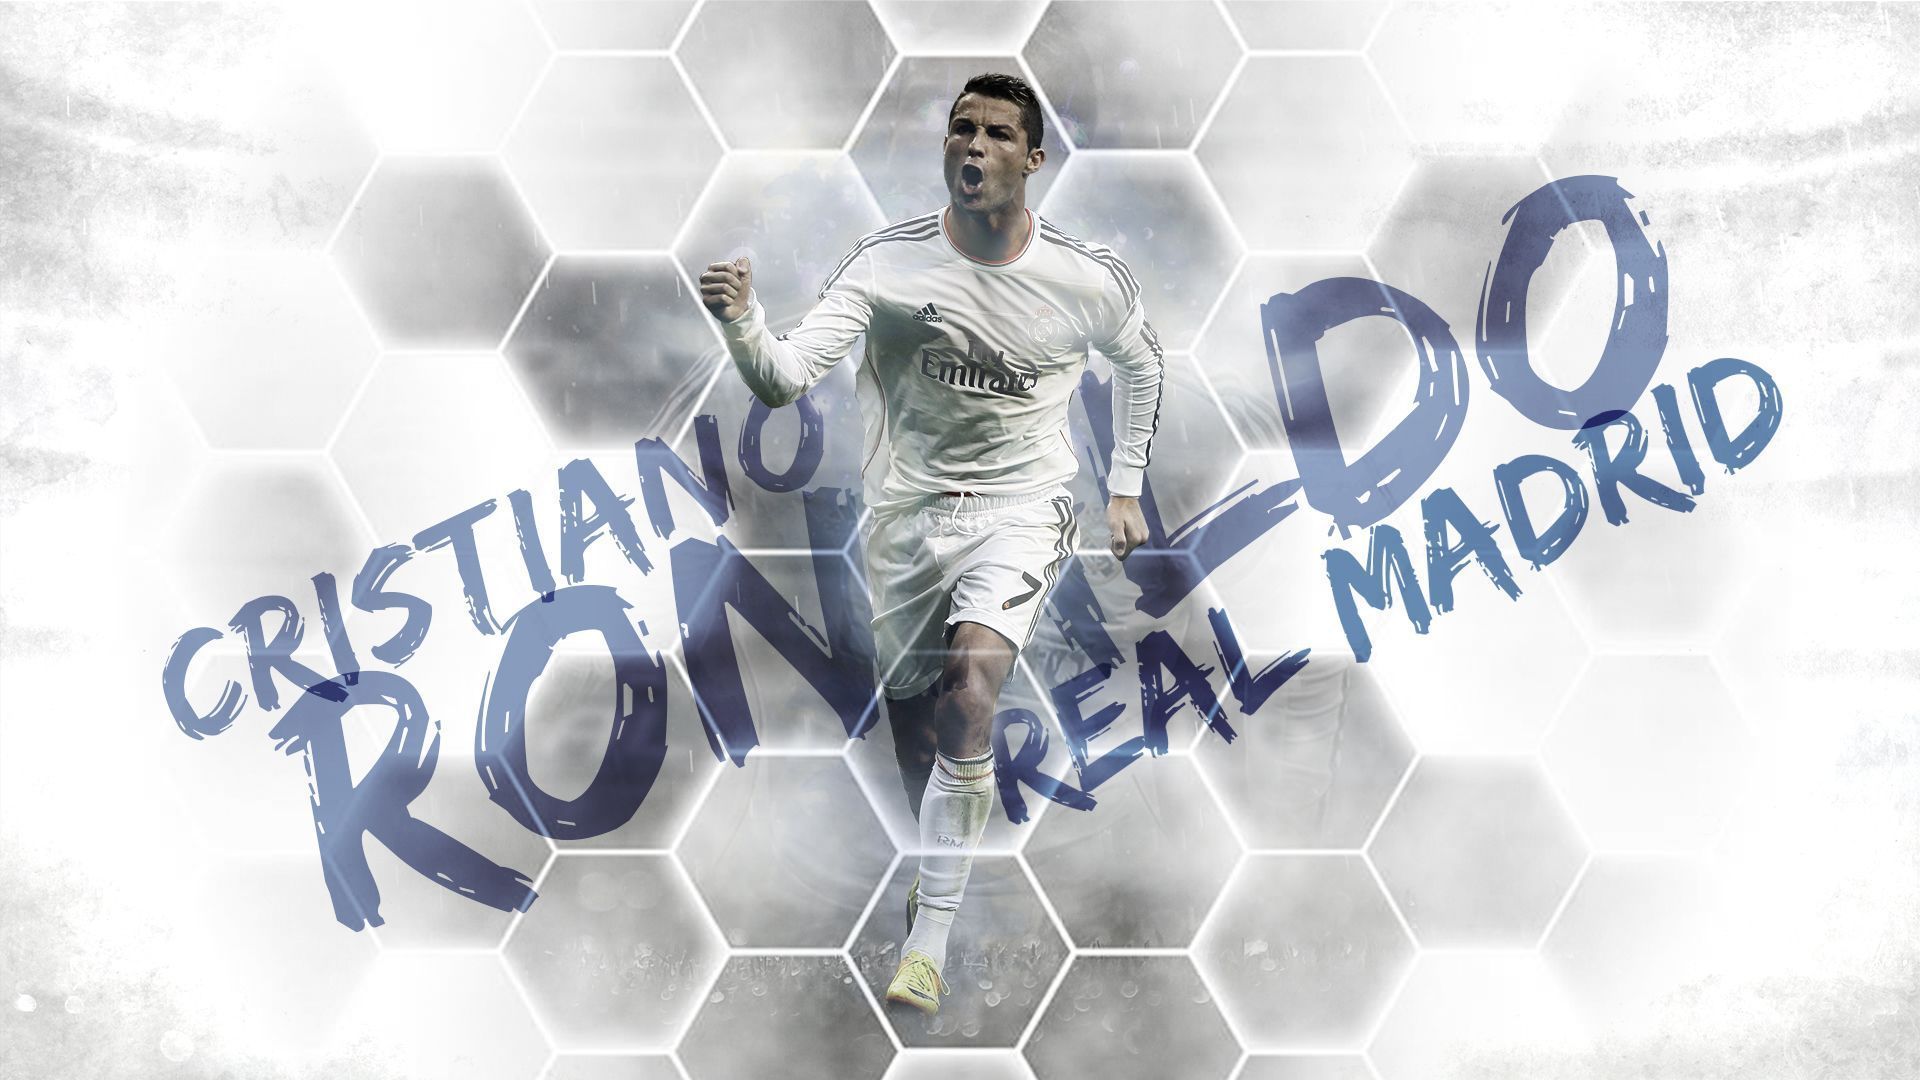 Cristiano ronaldo real madrid wallpaper Wallpapers, Backgrounds